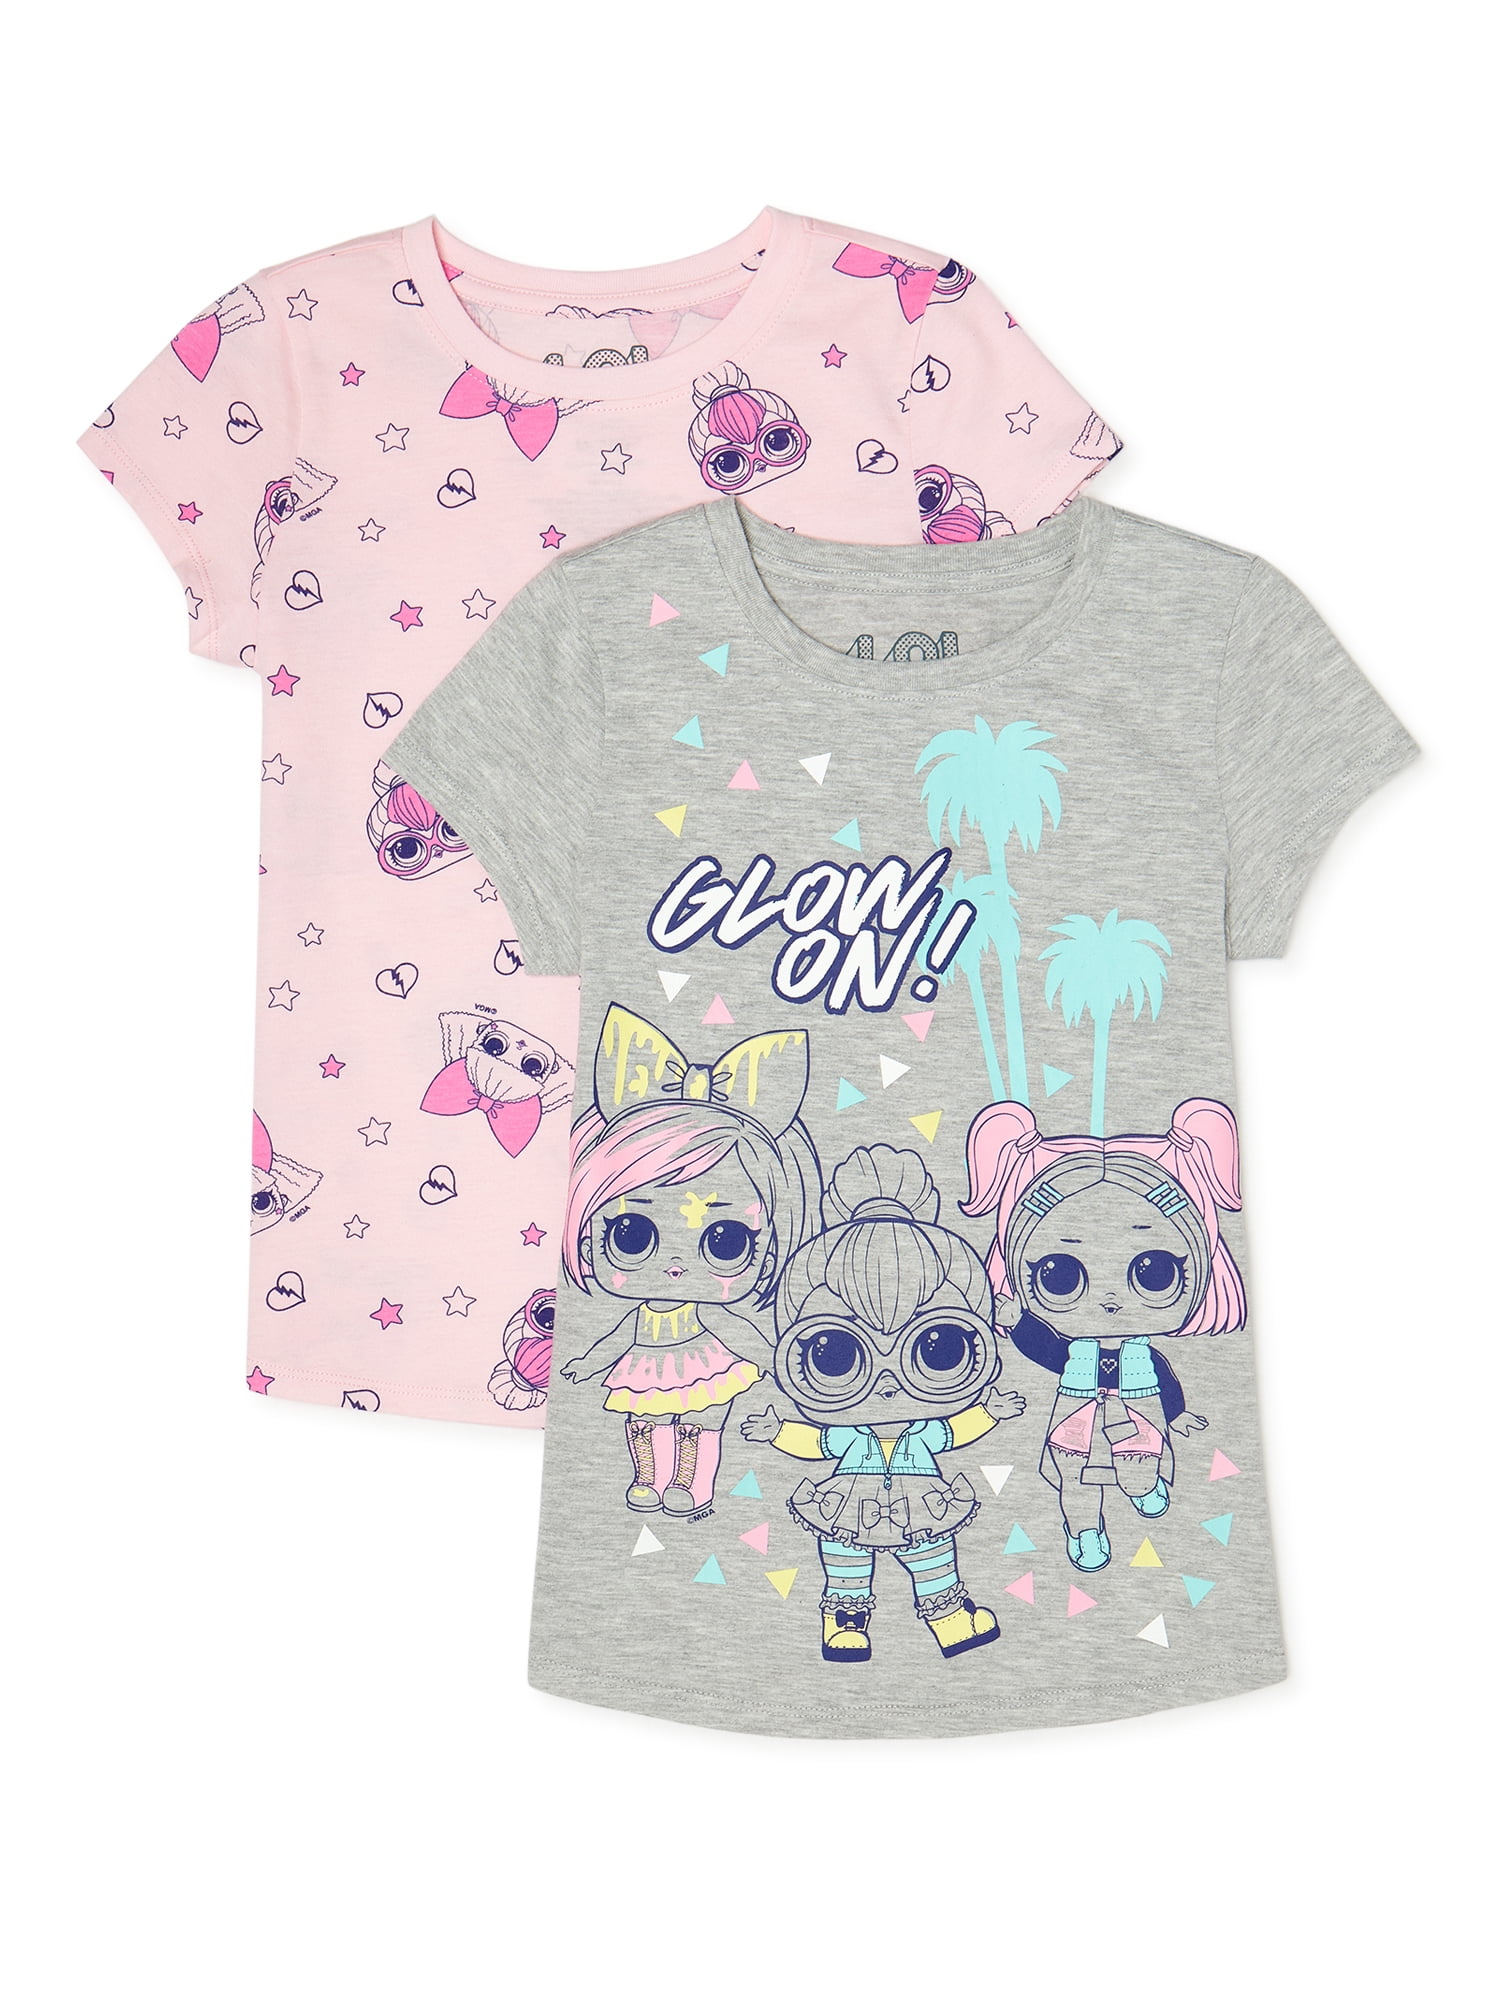 NEW L.O.L Surprise 2-Pack Girls Graphic T-Shirts Choose your Size LOL 